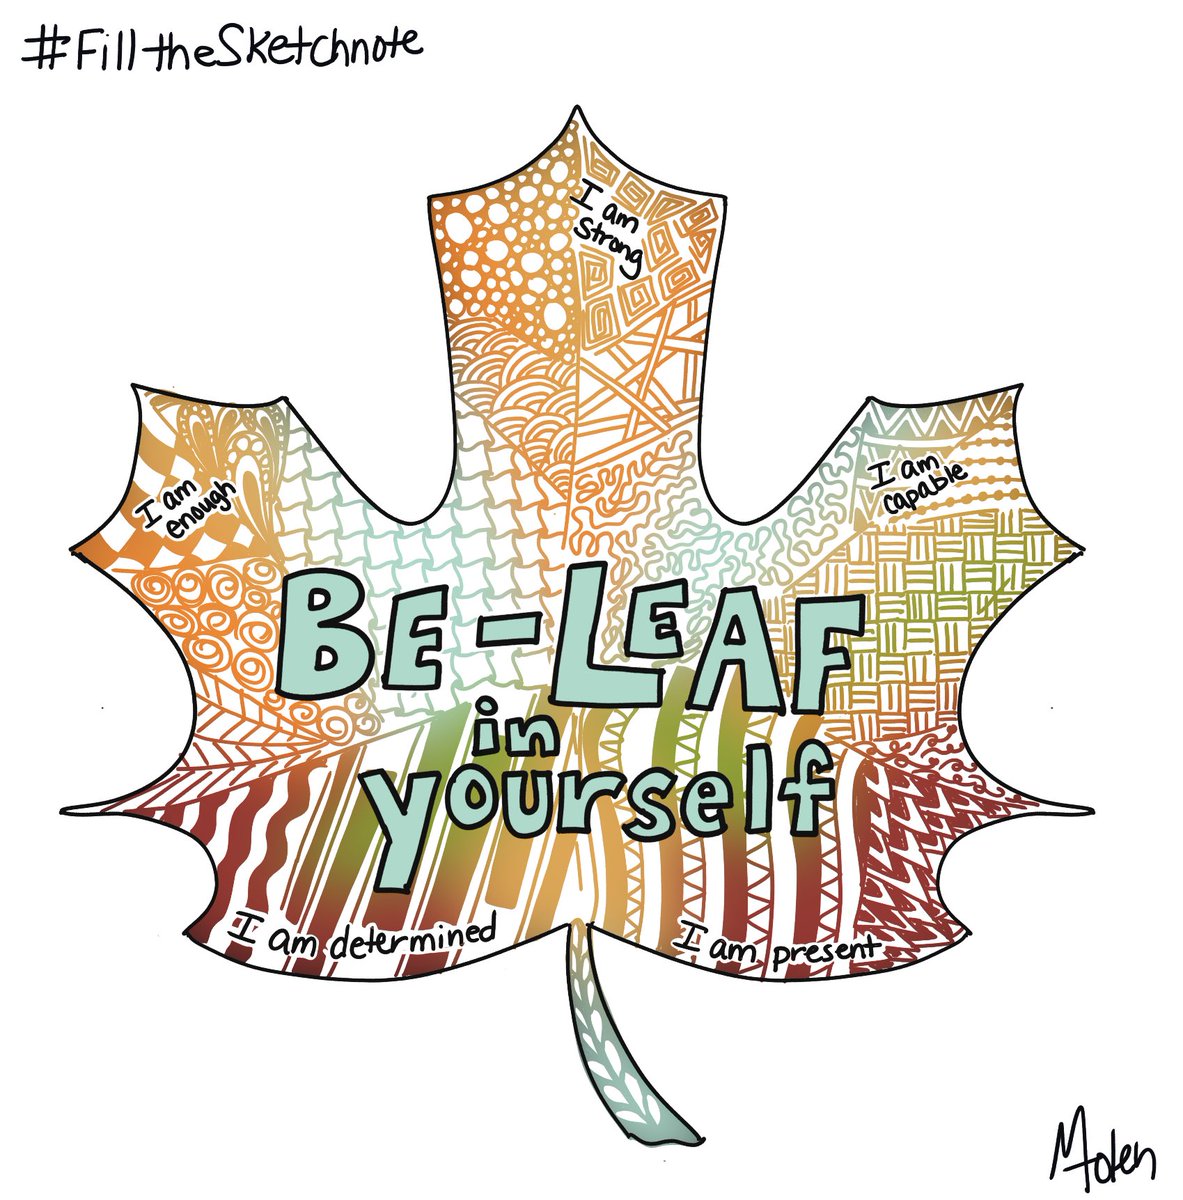 #passthesketchnote is #FillTheSketchnote this year and I am excited to share my be-leaf in yourself leaf with our recent #DoodleAndChat fun #zentangles.
@mospillman @carrie_baughcum @PTSketchNote